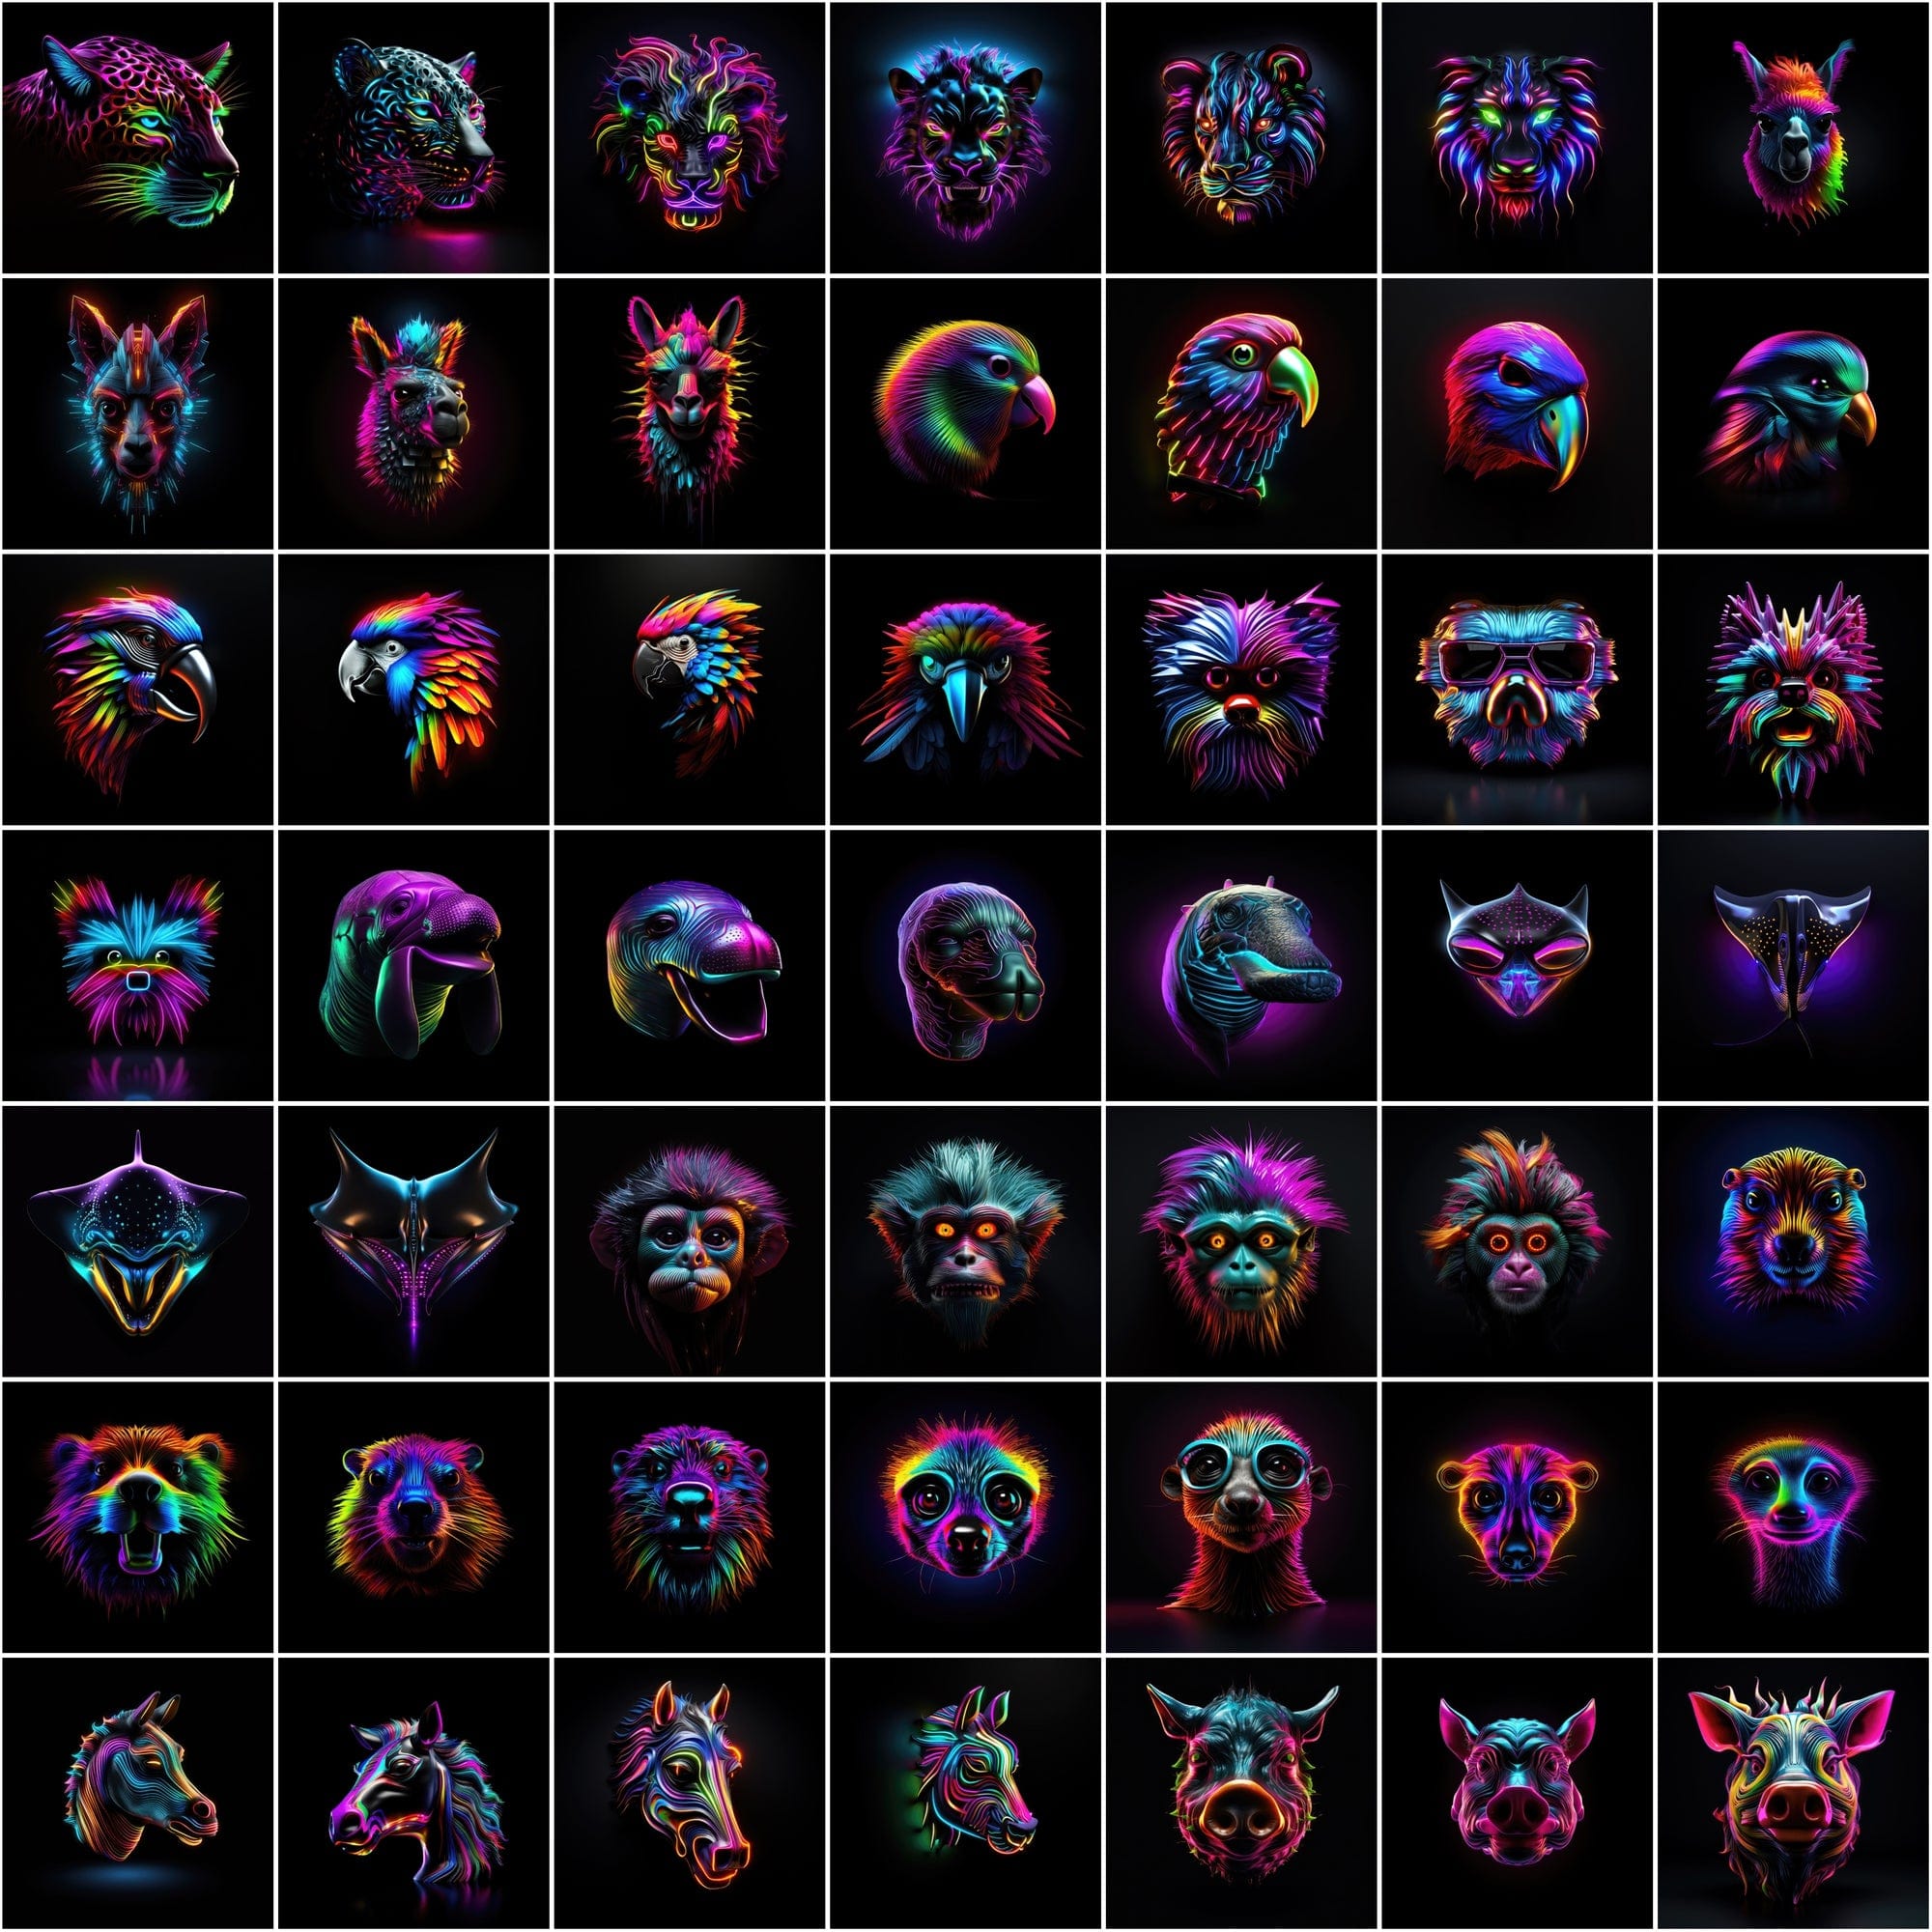 Neon Animal Heads Digital Art Collection - 550 PNG Images with Commercial License, Colorful and Vibrant Digital Download Sumobundle